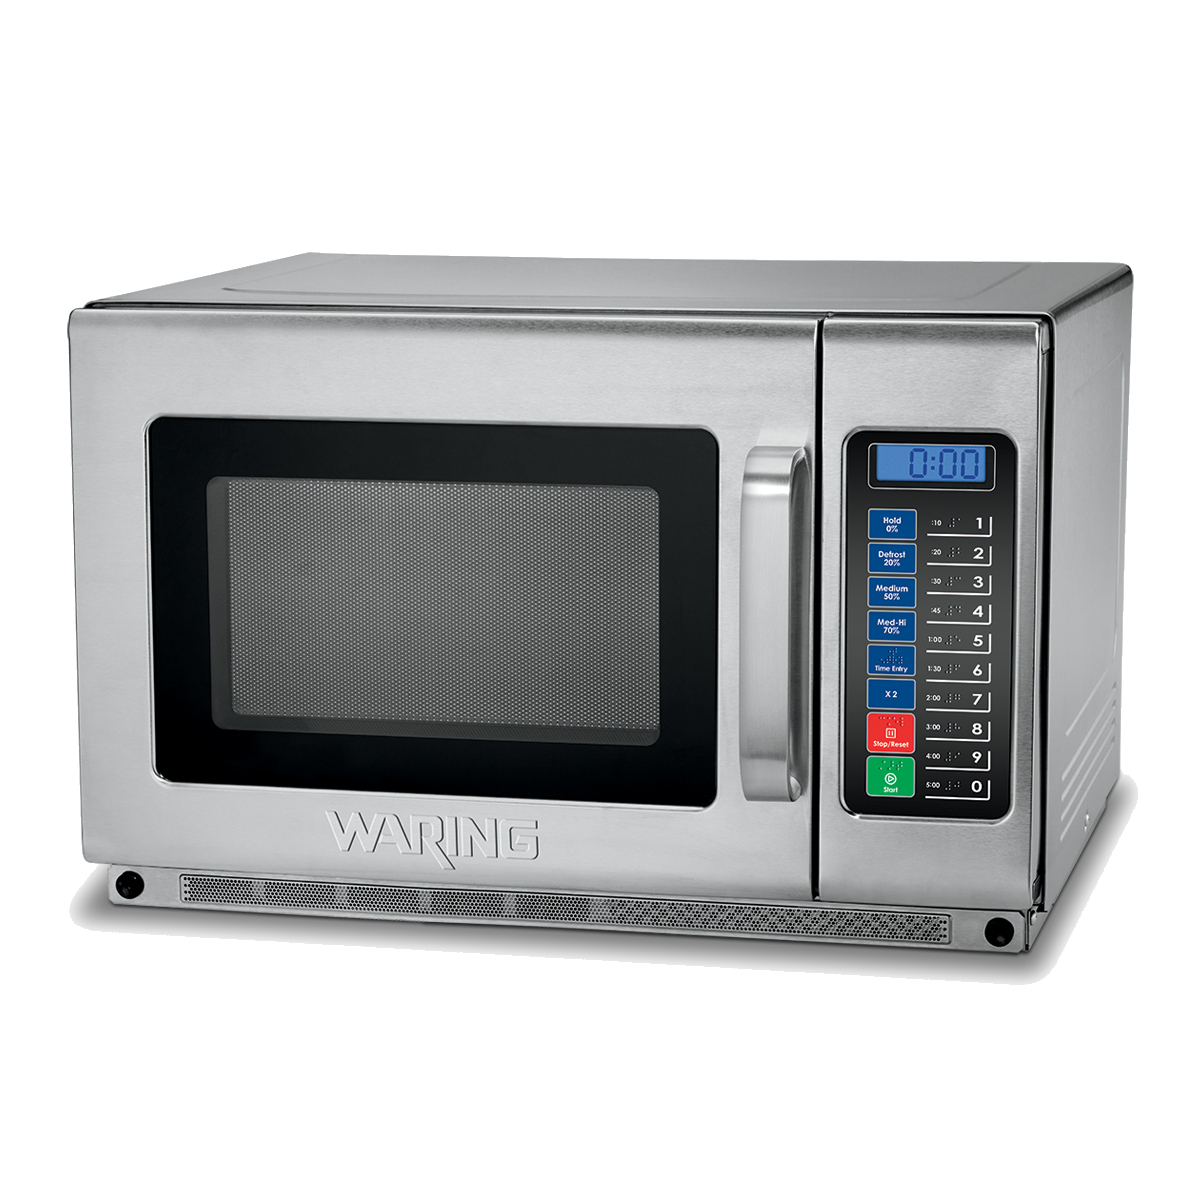 https://www.waringcommercialproducts.com/files/products/wmo120-waring-microwave-oven-main.png